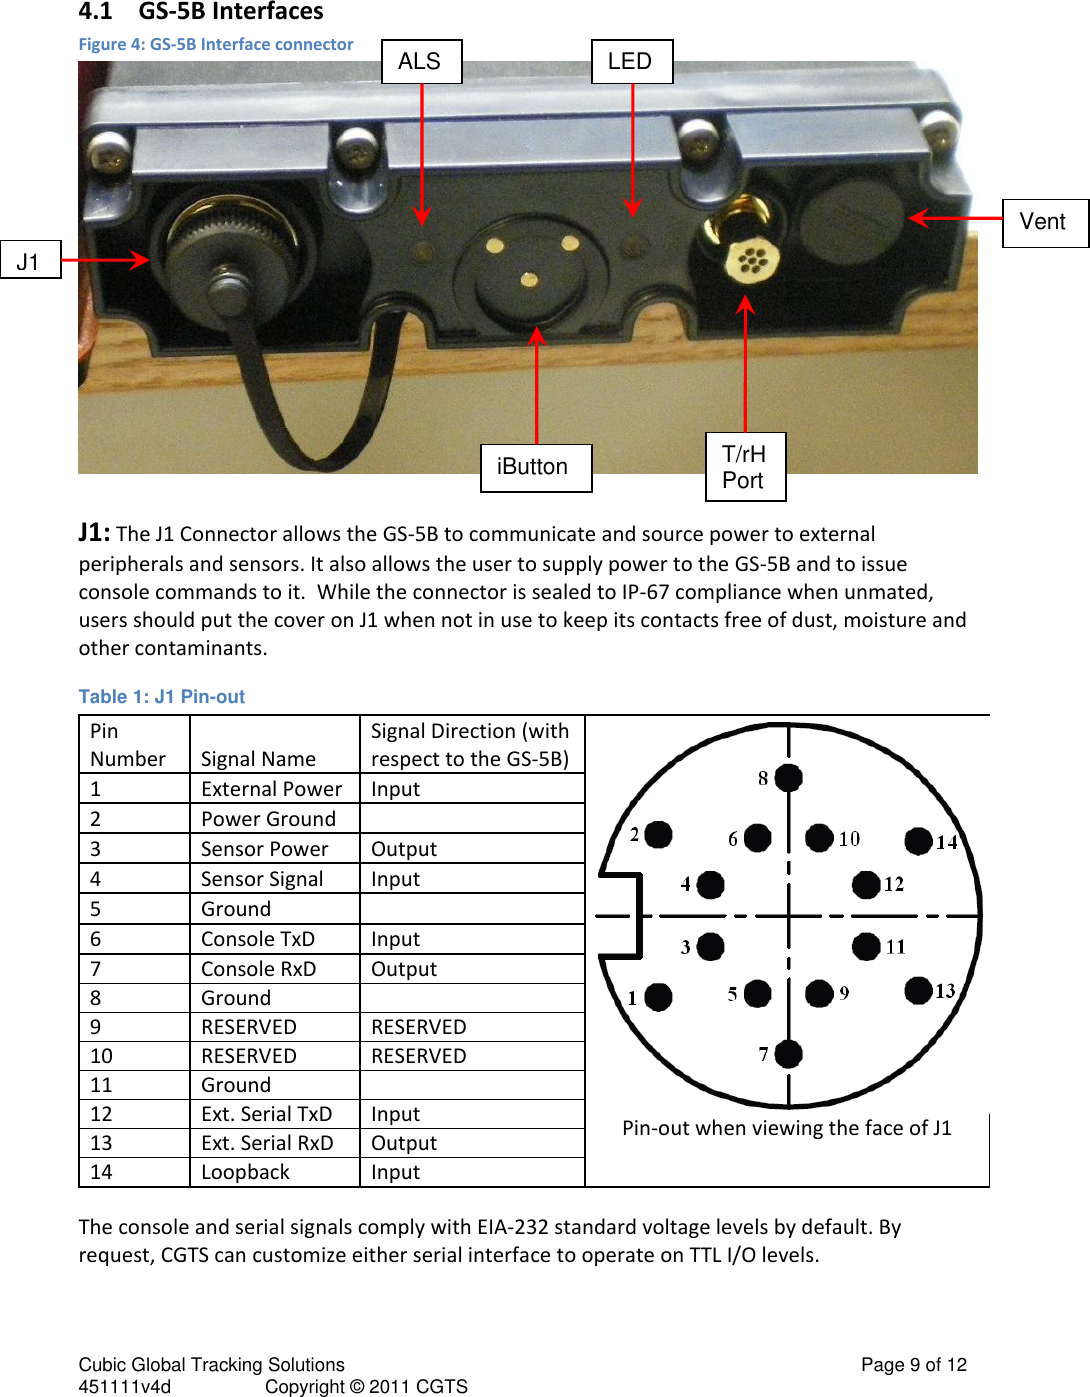 Cubic Global Tracking Solutions                                                                                                   Page 9 of 12 451111v4d                  Copyright © 2011 CGTS            4.1 GS-5B Interfaces Figure 4: GS-5B Interface connector   J1: The J1 Connector allows the GS-5B to communicate and source power to external peripherals and sensors. It also allows the user to supply power to the GS-5B and to issue console commands to it.  While the connector is sealed to IP-67 compliance when unmated, users should put the cover on J1 when not in use to keep its contacts free of dust, moisture and other contaminants. Table 1: J1 Pin-out Pin Number Signal Name Signal Direction (with  respect to the GS-5B) Pin-out when viewing the face of J1 1 External Power Input 2 Power Ground  3 Sensor Power Output 4 Sensor Signal Input 5 Ground  6 Console TxD Input 7 Console RxD Output 8 Ground  9 RESERVED RESERVED 10 RESERVED RESERVED 11 Ground  12 Ext. Serial TxD Input 13 Ext. Serial RxD Output 14 Loopback Input The console and serial signals comply with EIA-232 standard voltage levels by default. By request, CGTS can customize either serial interface to operate on TTL I/O levels. T/rH Port iButton LED Vent J1 ALS 